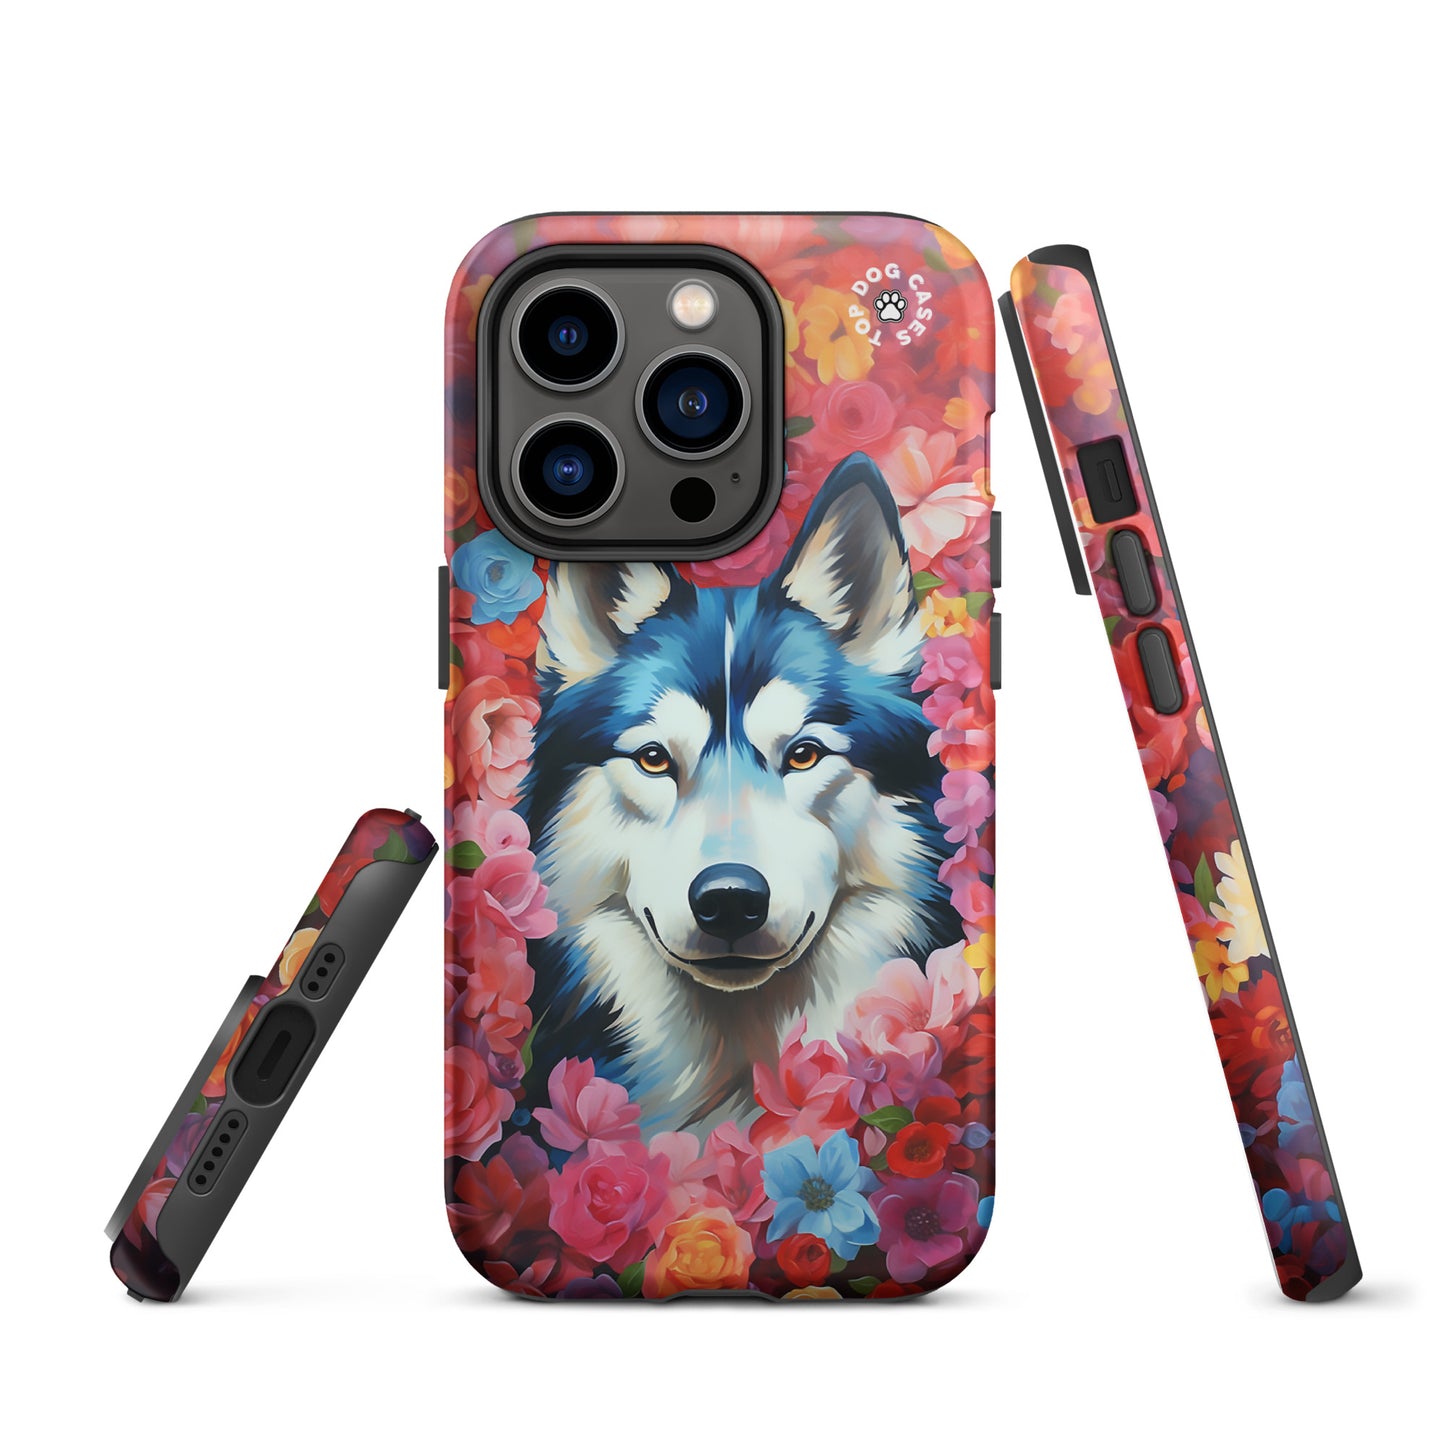 iPhone 14 Case with Siberian Husky - Top Dog Cases - #CuteDog, #CuteDogs, #CutePhoneCases, #DogPhoneCase, #dogs, #DogsAndFlowers, #Flowers, #Husky, #iPhone, #iPhone14, #iPhone14case, #iPhone14DogCase, #iPhone14Plus, #iPhone14Pluscase, #iPhone14Pro, #iPhone14ProMax, #iPhone14ProMaxCase, #iPhonecase